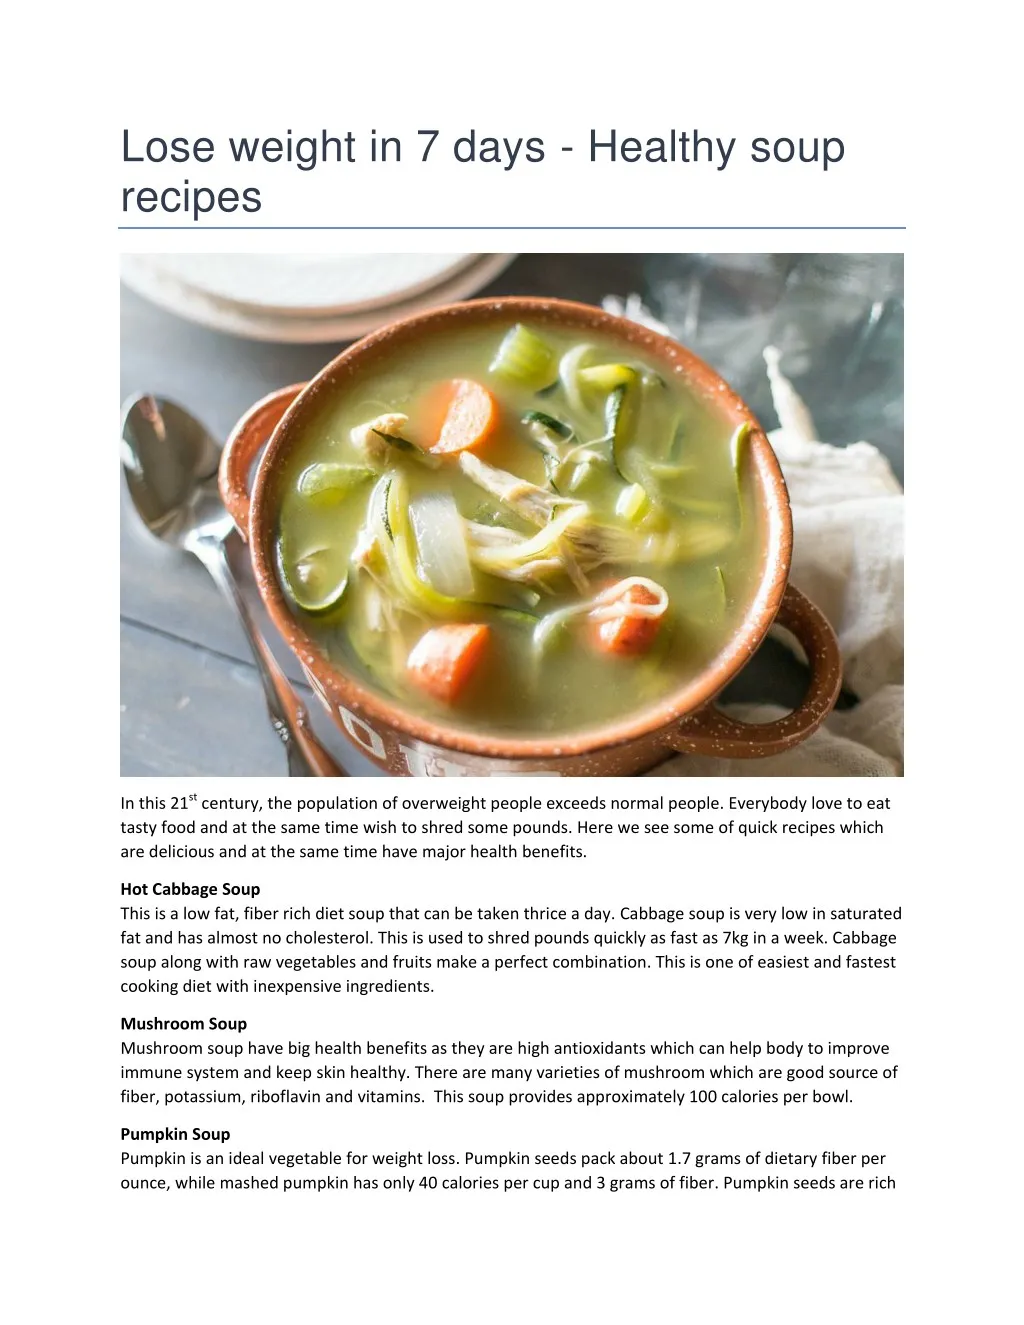 lose weight in 7 days healthy soup recipes